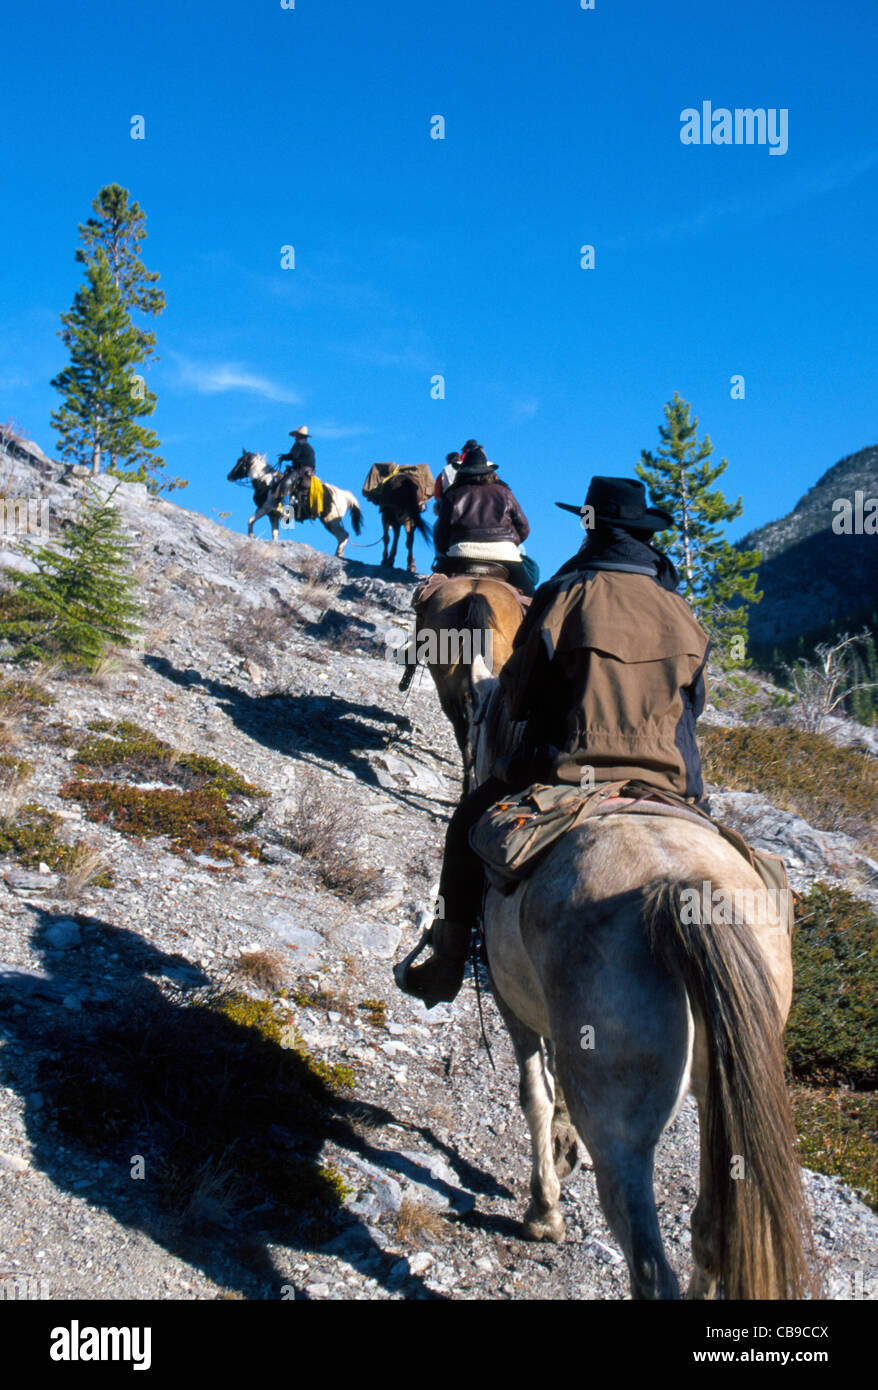 Horseback riders on a vacation trip climb a mountain trail during their adventure in Banff National Park in the Canadian Rockies in Alberta, Canada. Stock Photo